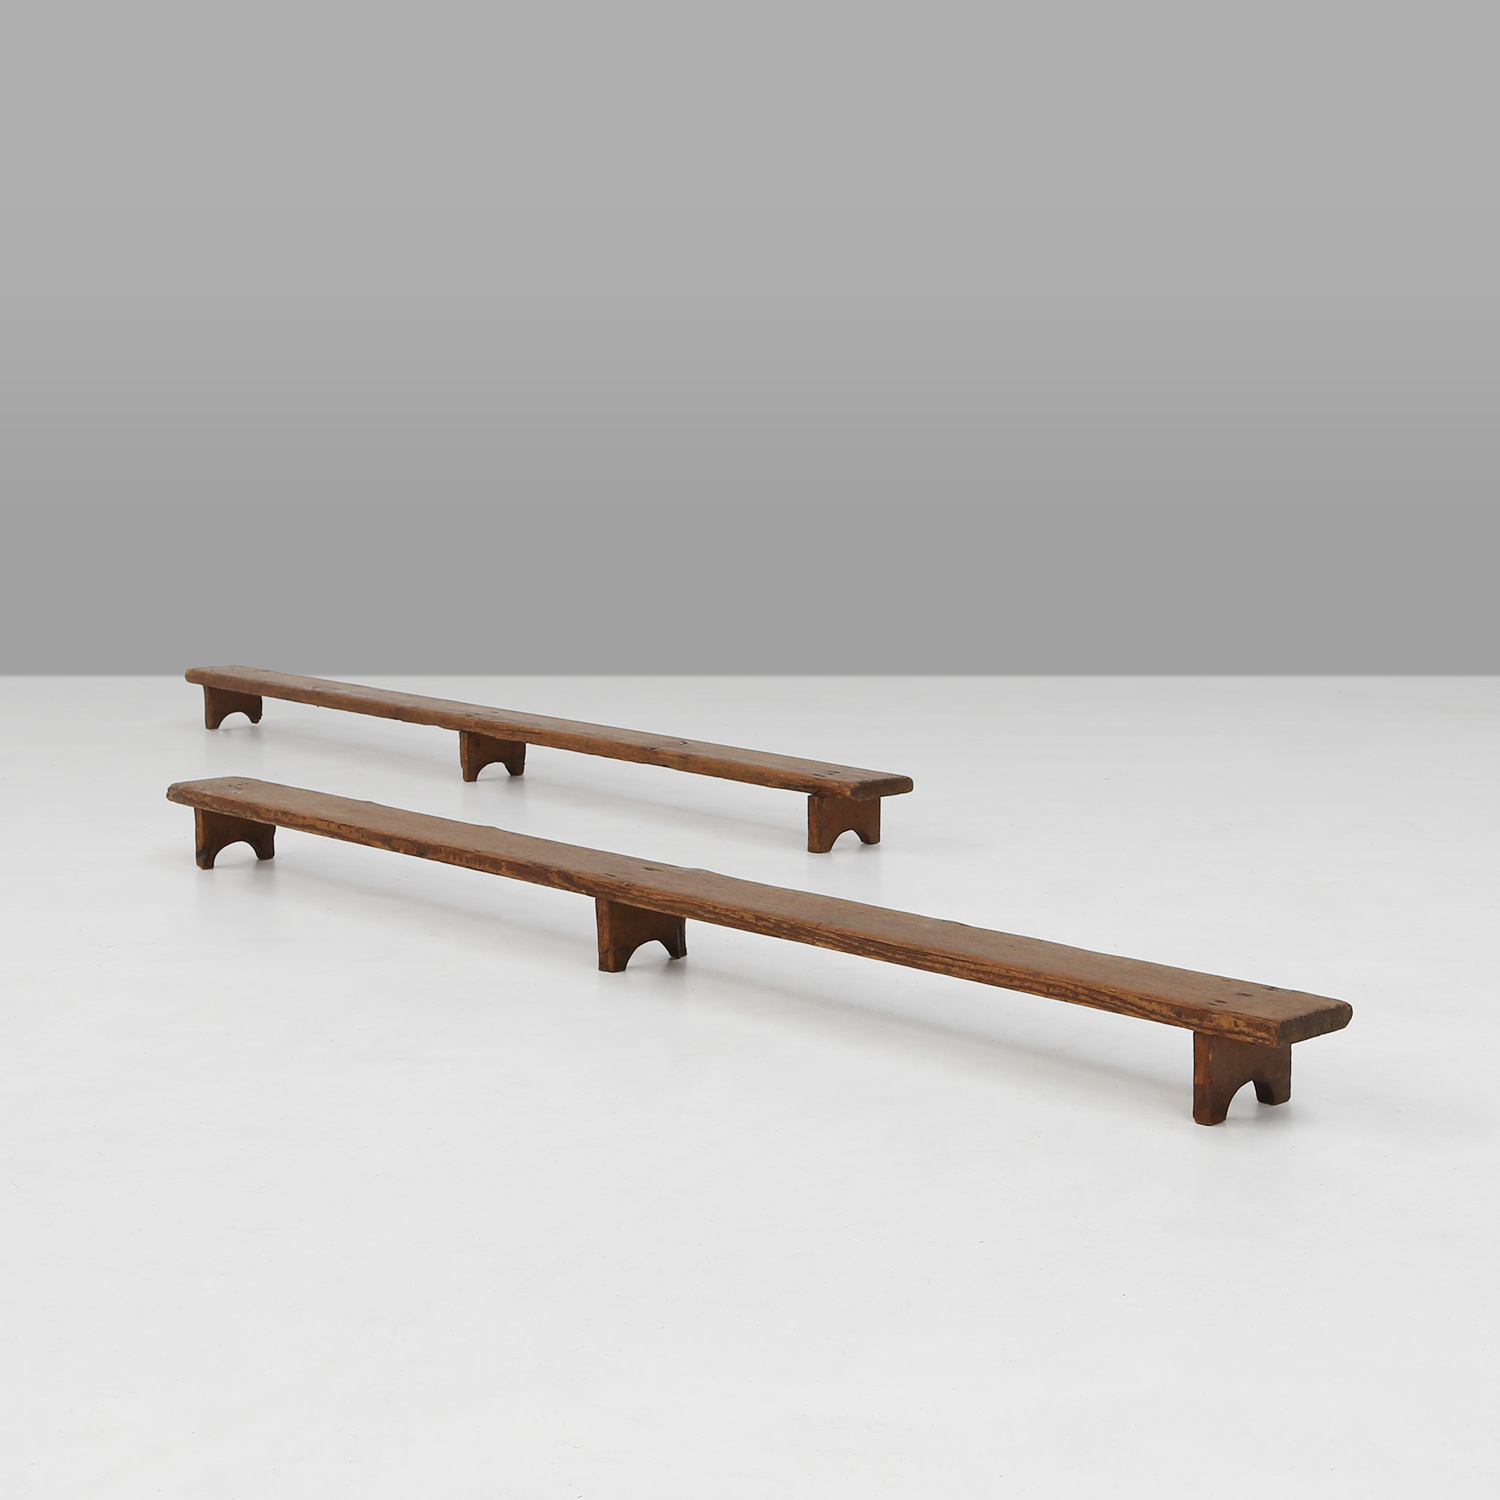 Rustic french benches 1850thumbnail